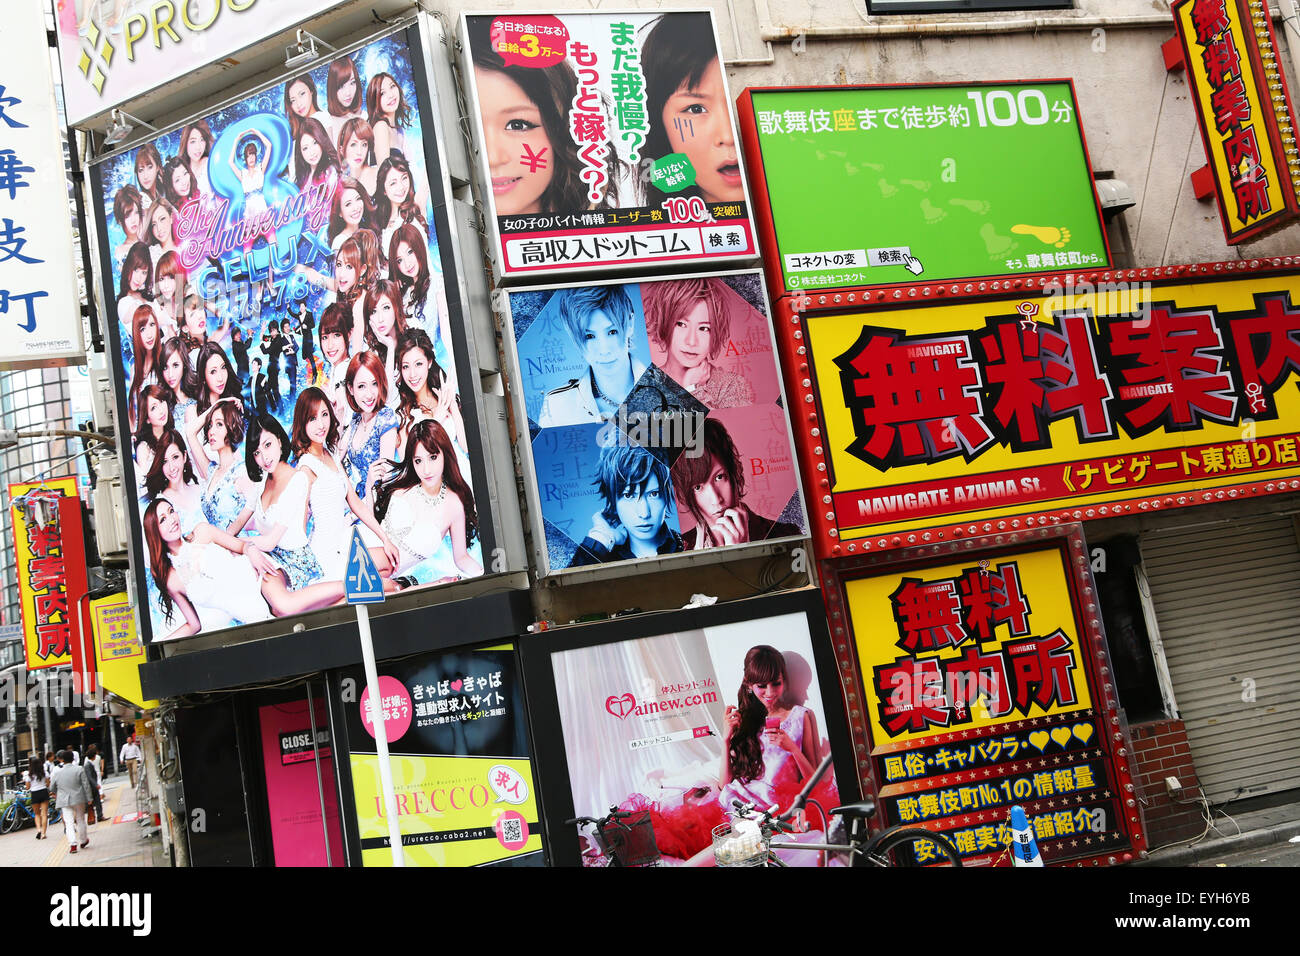 Nightclub and nightlife advertising signs in the red light district of Shinjuku, Tokyo, Japan Stock Photo